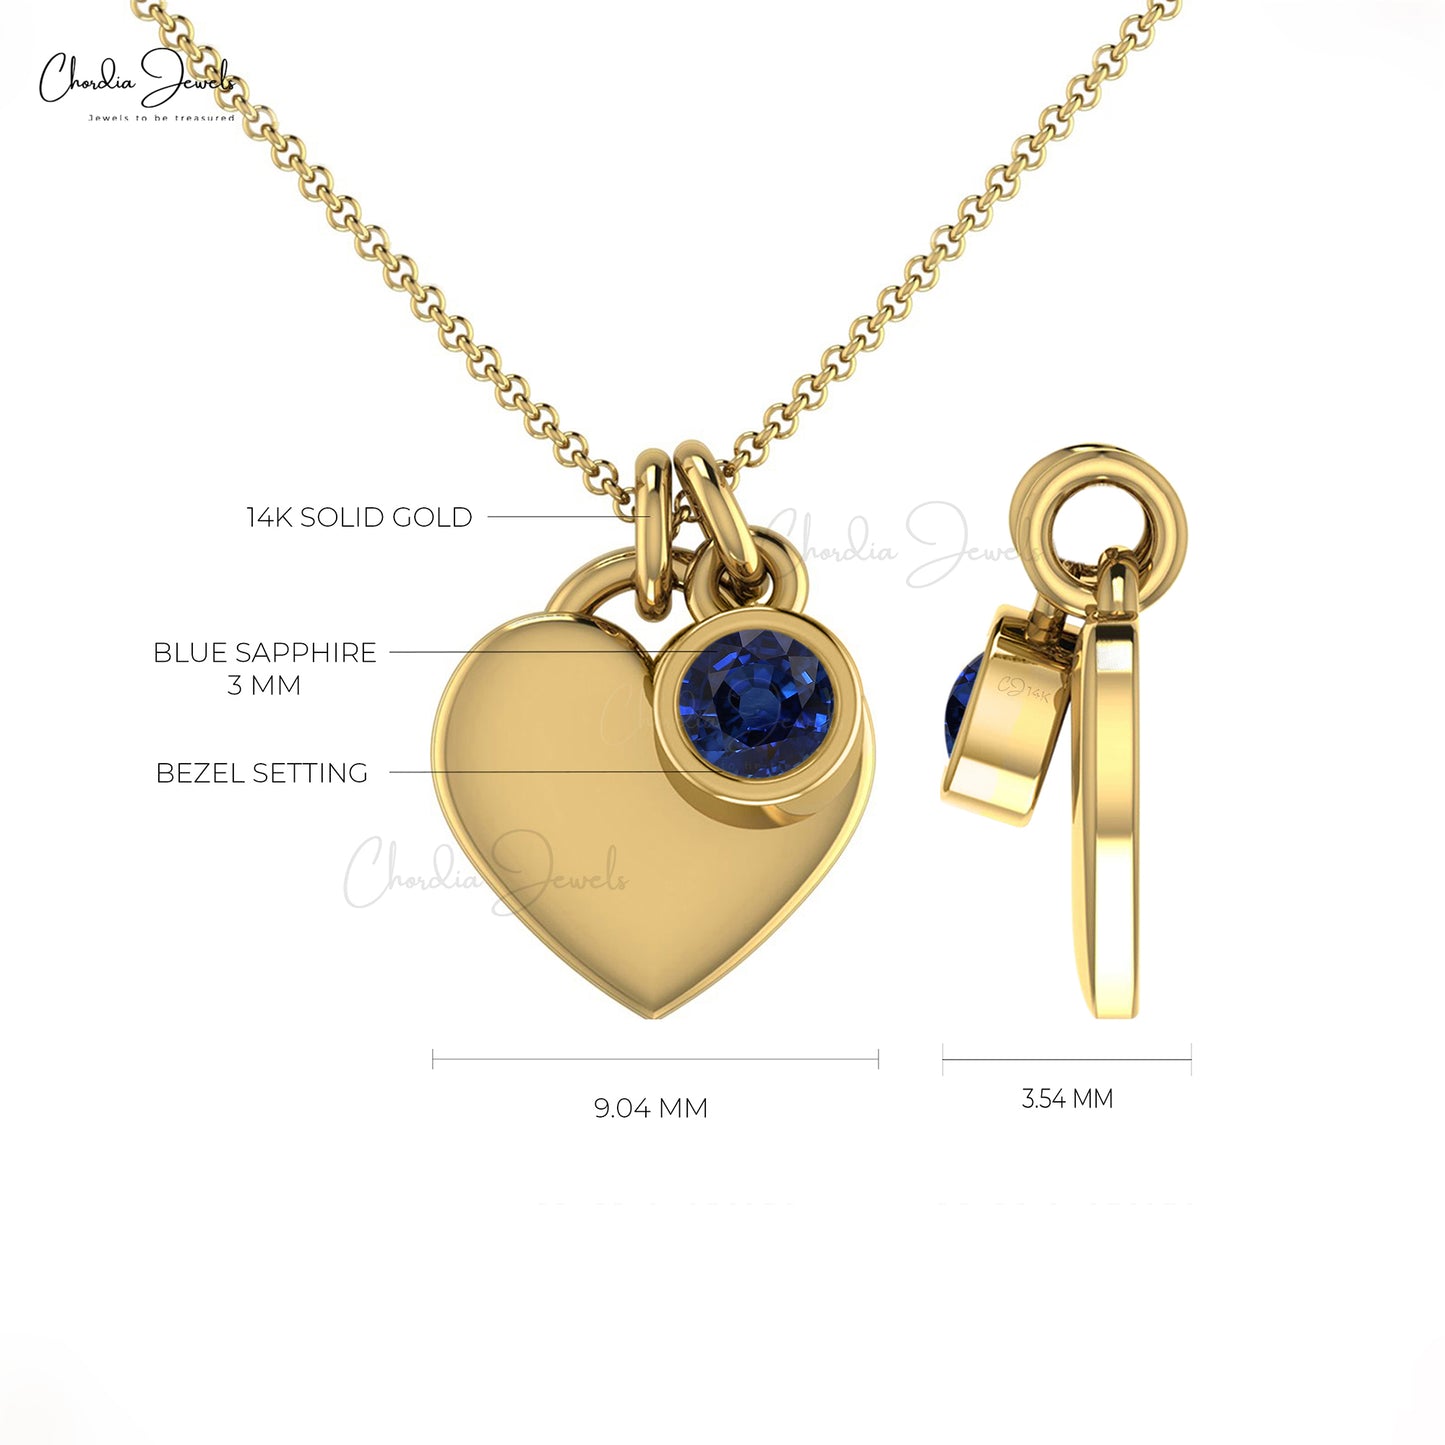 Natural Blue Sapphire Necklace, 14k Solid Gold Bezel Set Necklace, 3mm Round Cut Gemstone Necklace Gift for Her